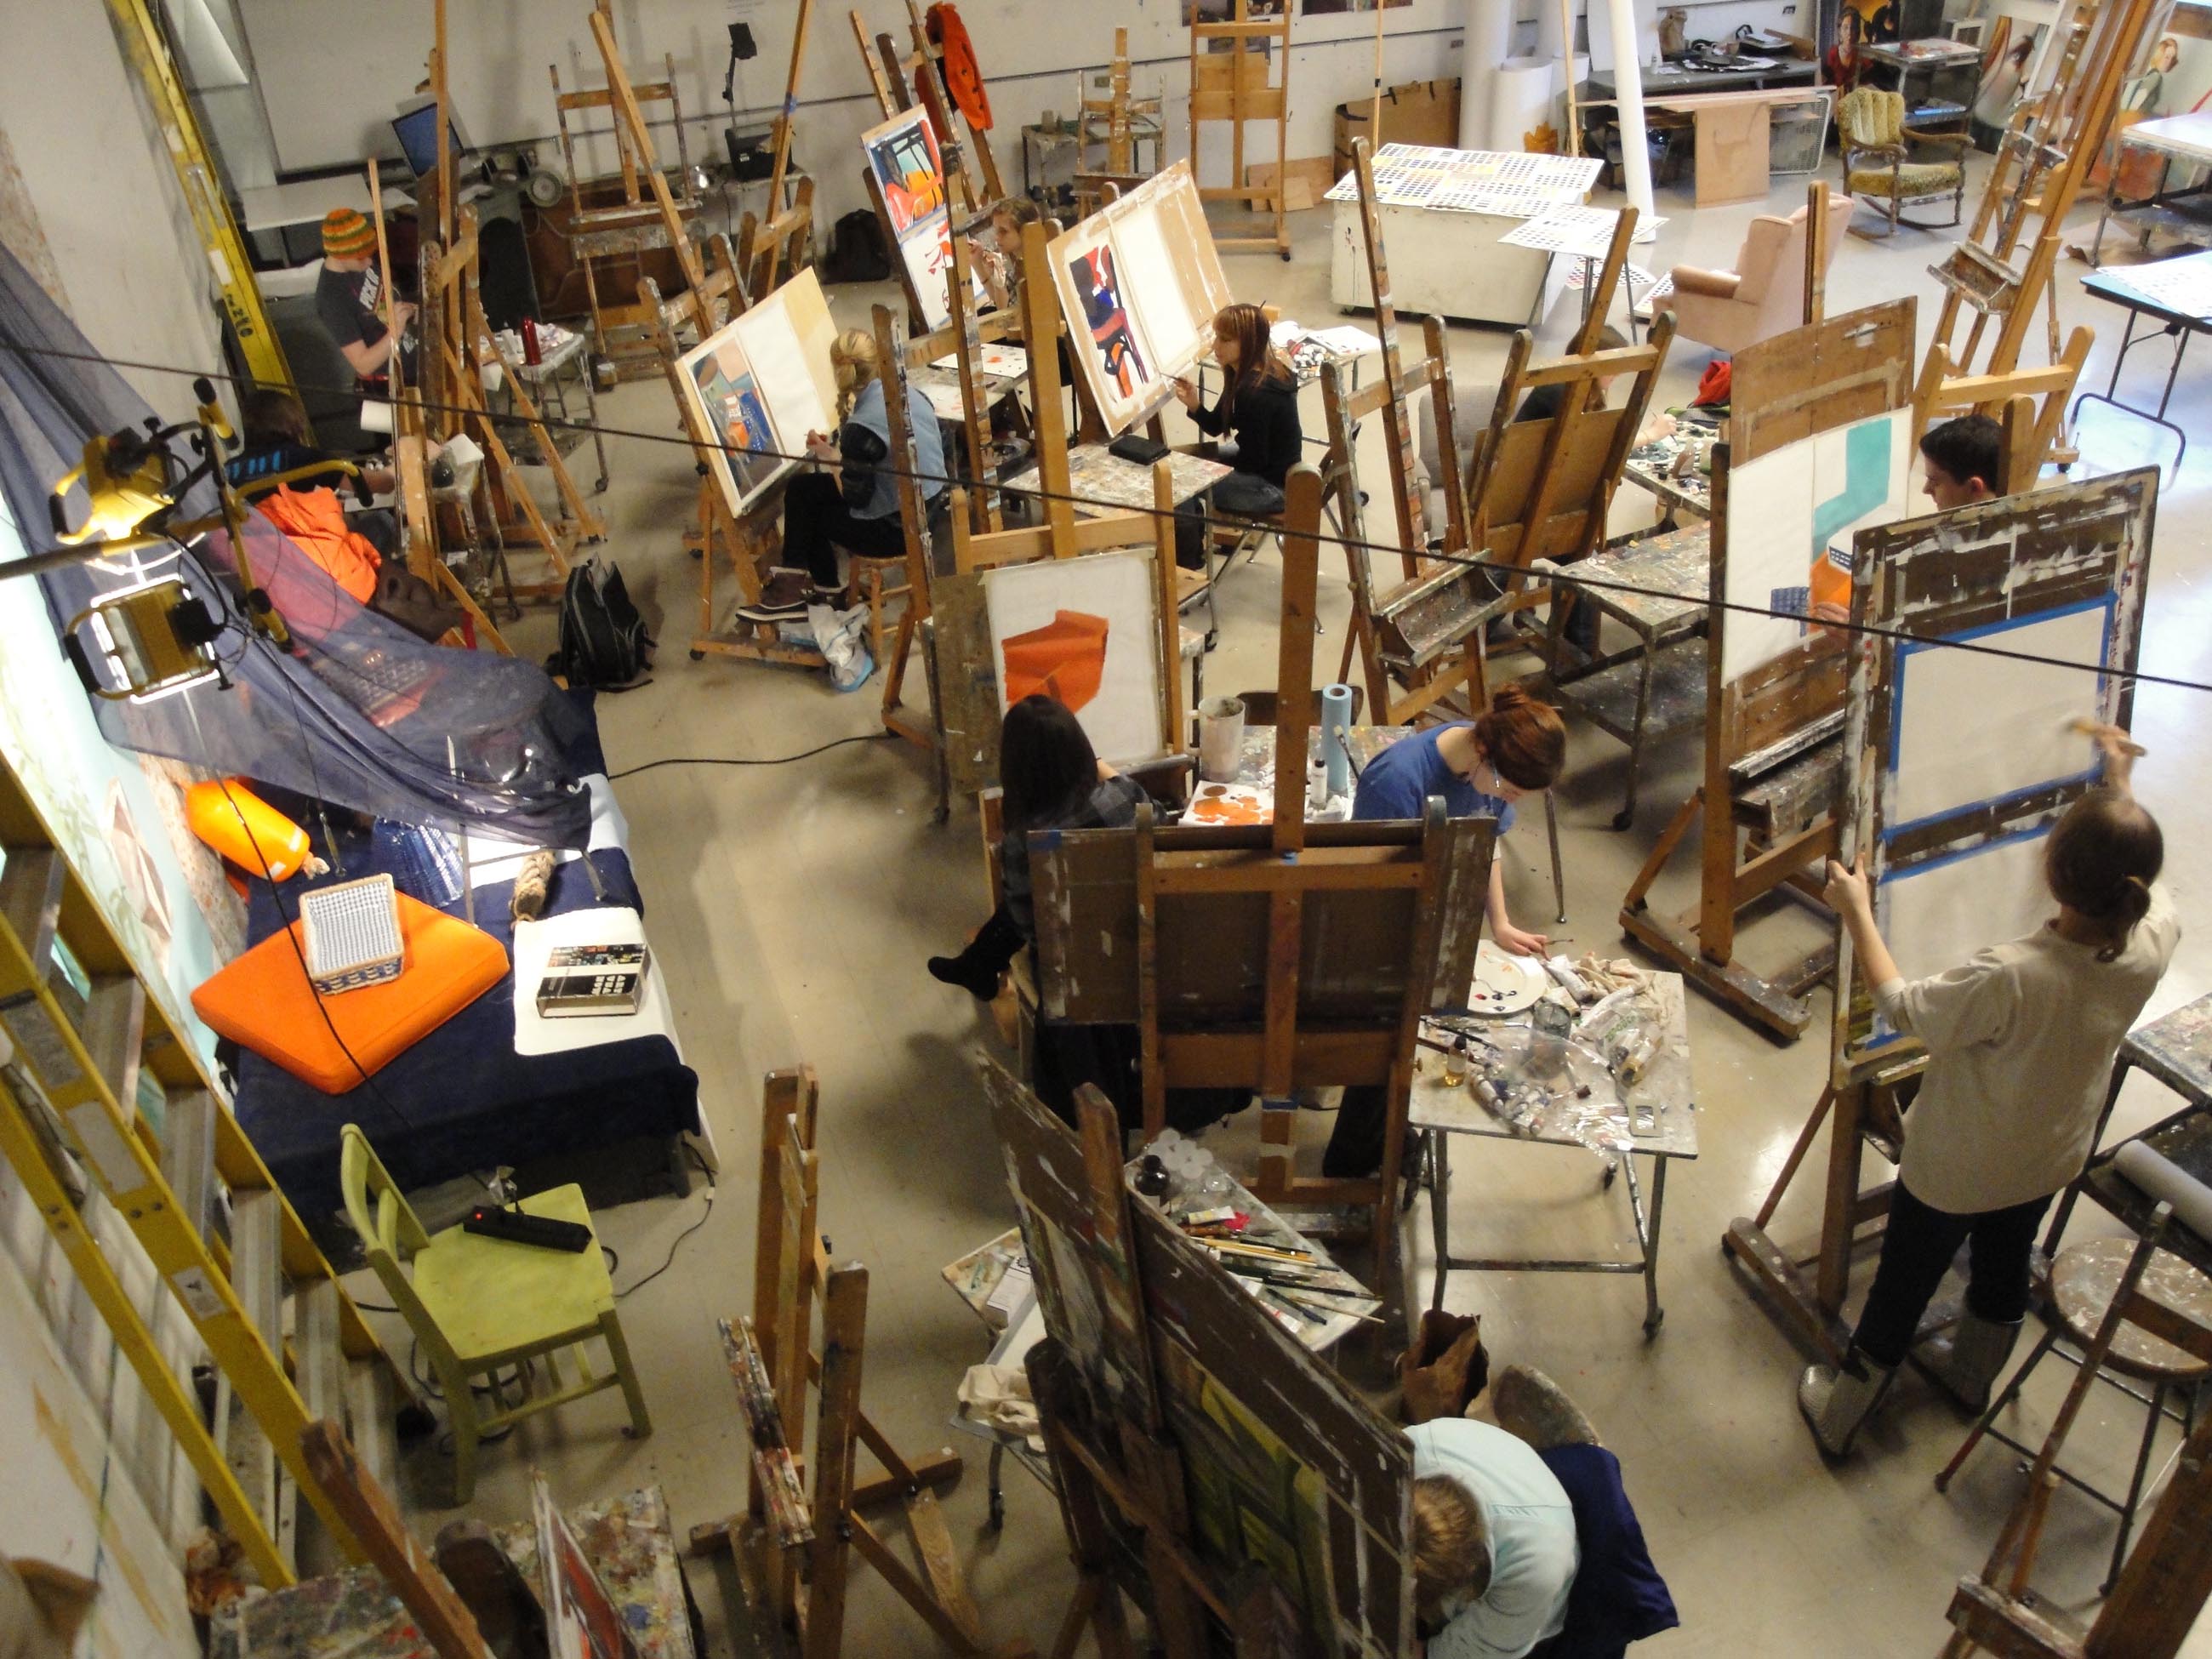 an overhead view of a large painting studio crowded with easels and cluttered with painting tools